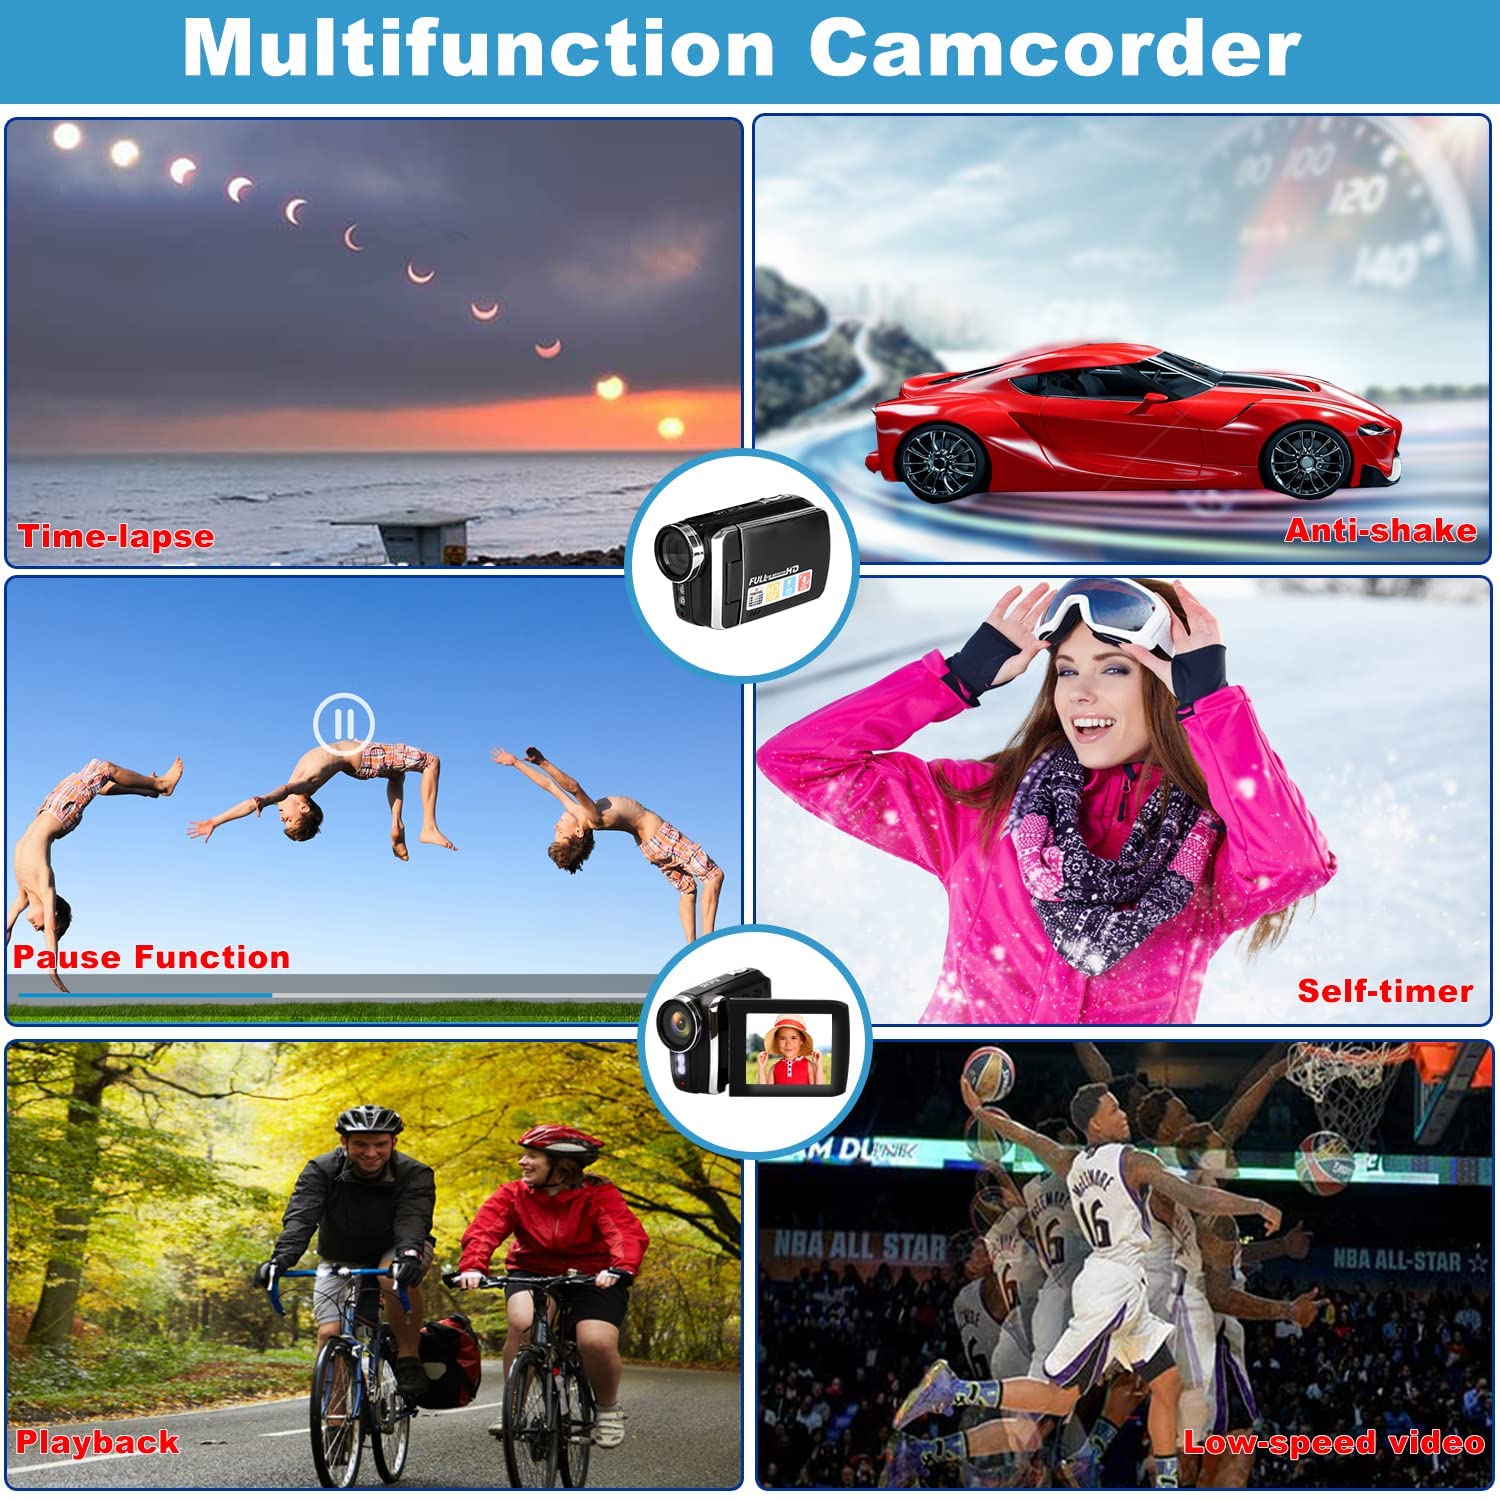 Video Camera Camcorder for Kids Full HD 1080P 30FPS 36.0MP Digital Cameras Recorder for YouTube TikTok 2.8 Inch 270 Degree Rotation Screen Vlogging Camcorders for Teens Children Beginners